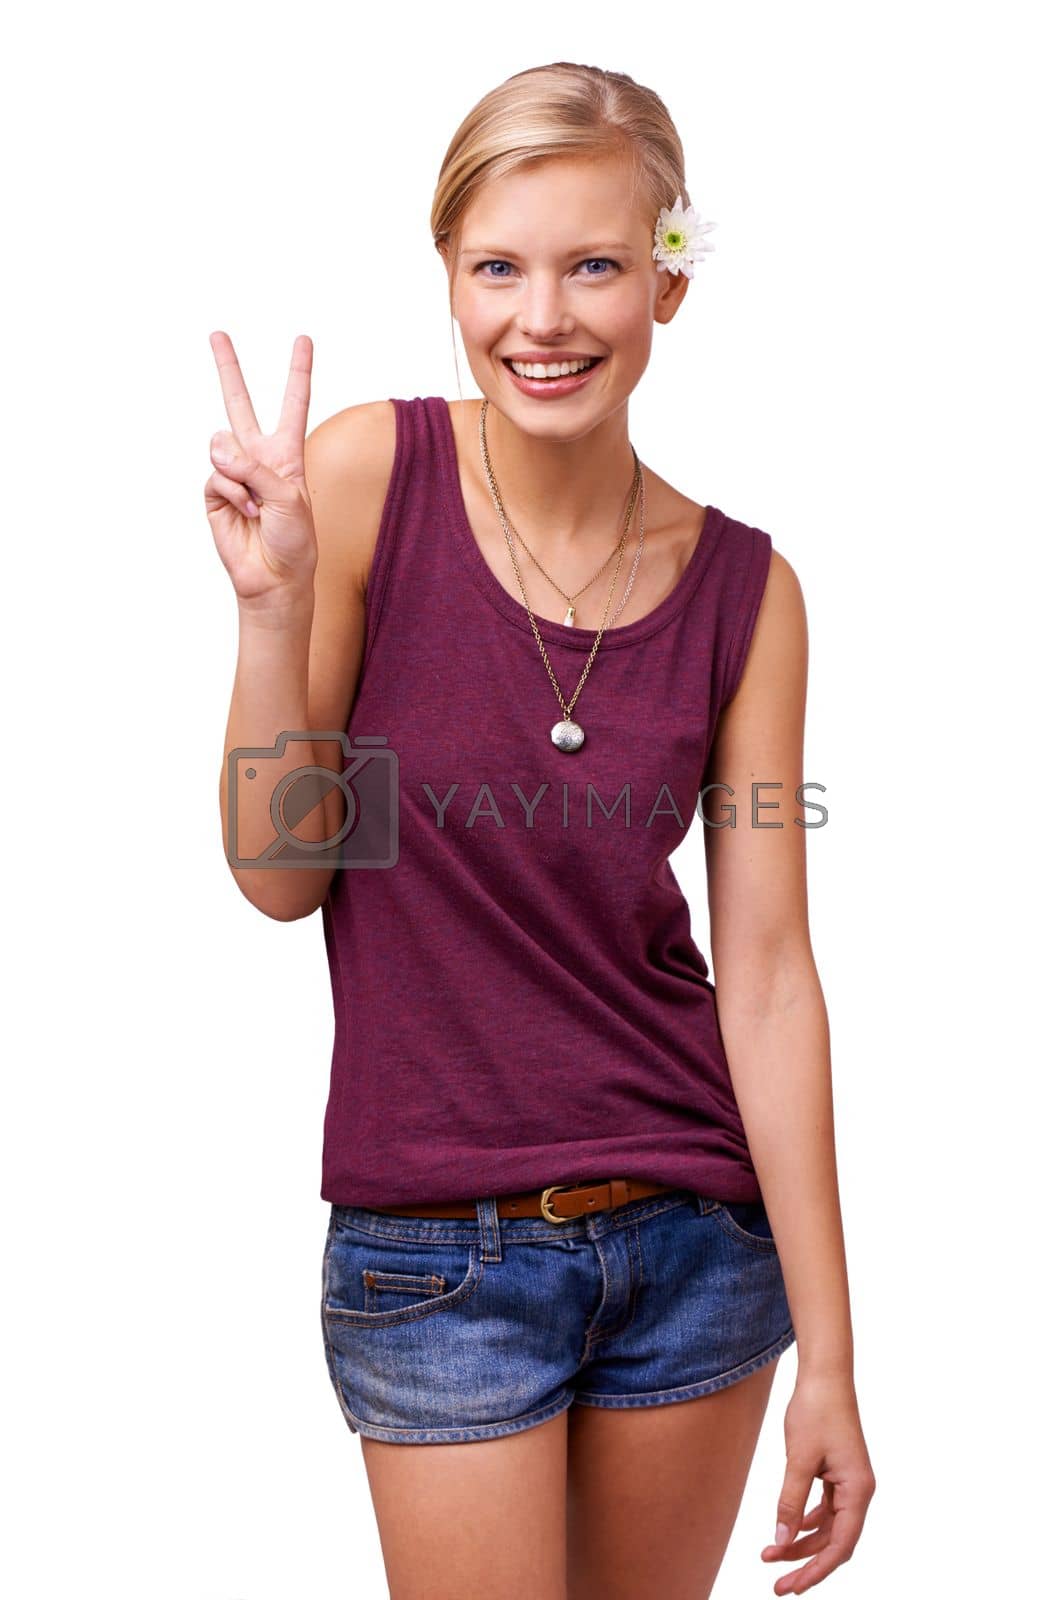 Royalty free image of Peace is all we need. Studio portrait of an attractive young woman giving the peace sign isolated on white. by YuriArcurs